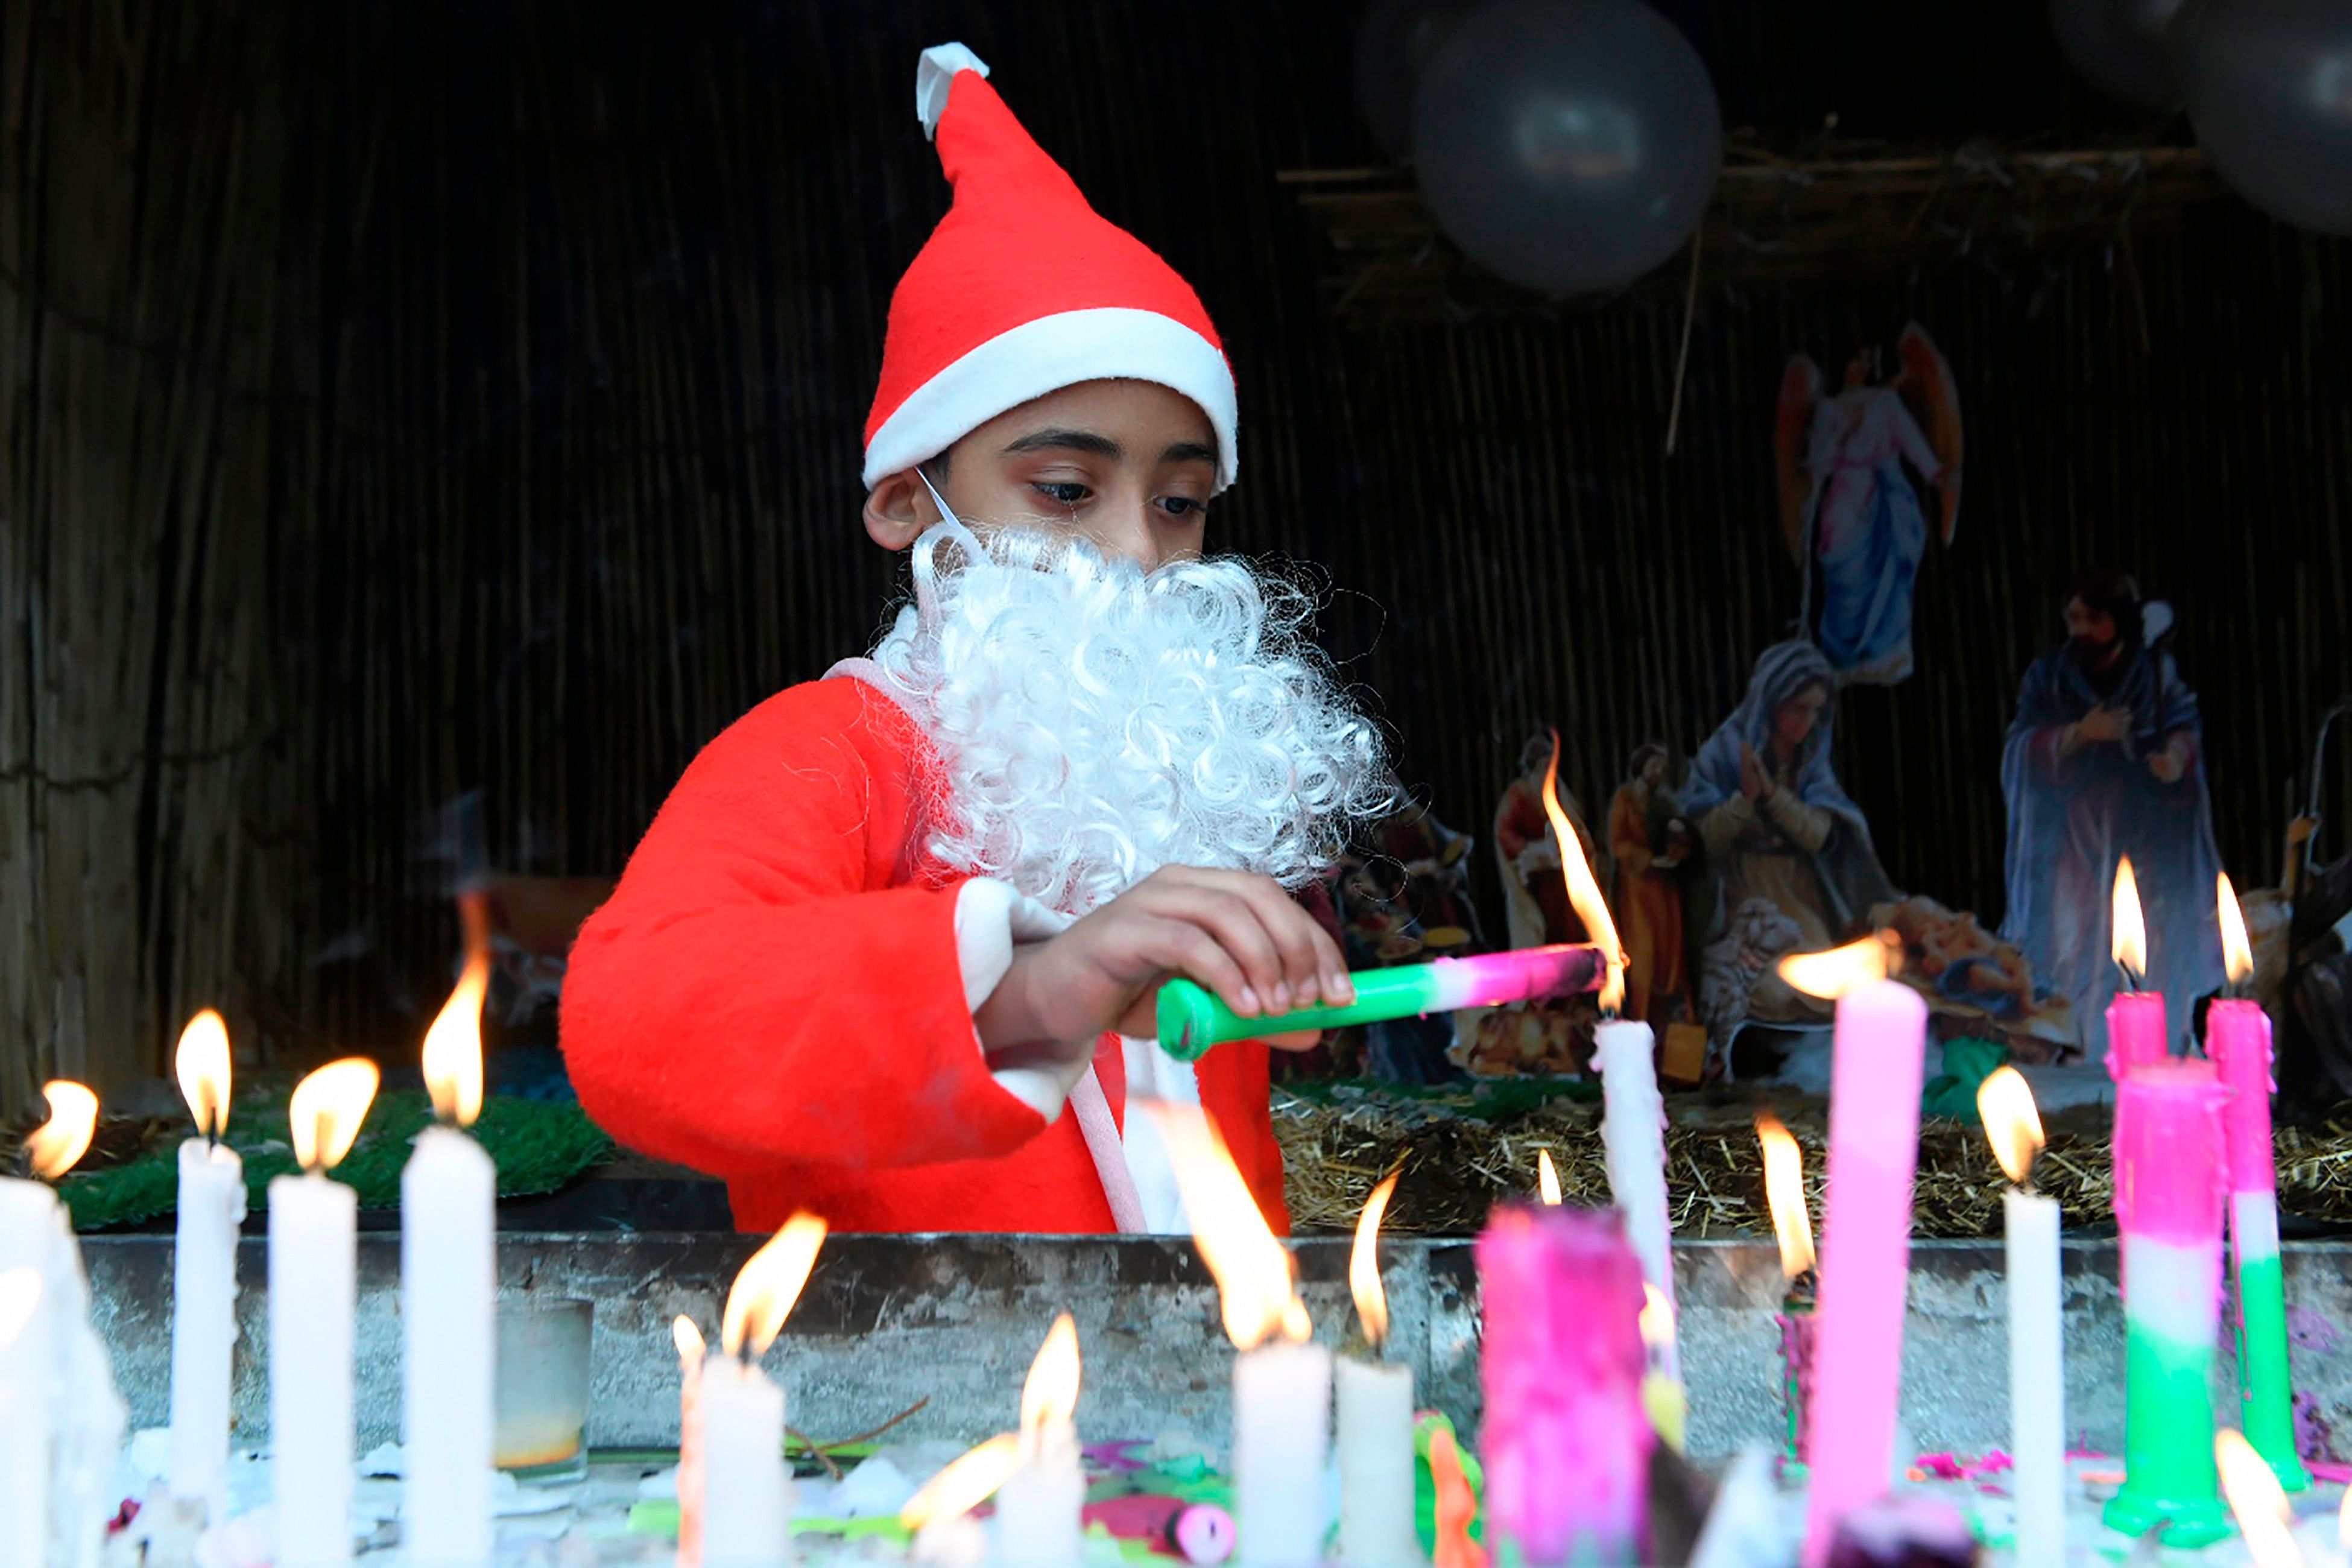 A child dressed as Santa Claus lights candles on Christmas Day. (AFP Photo)